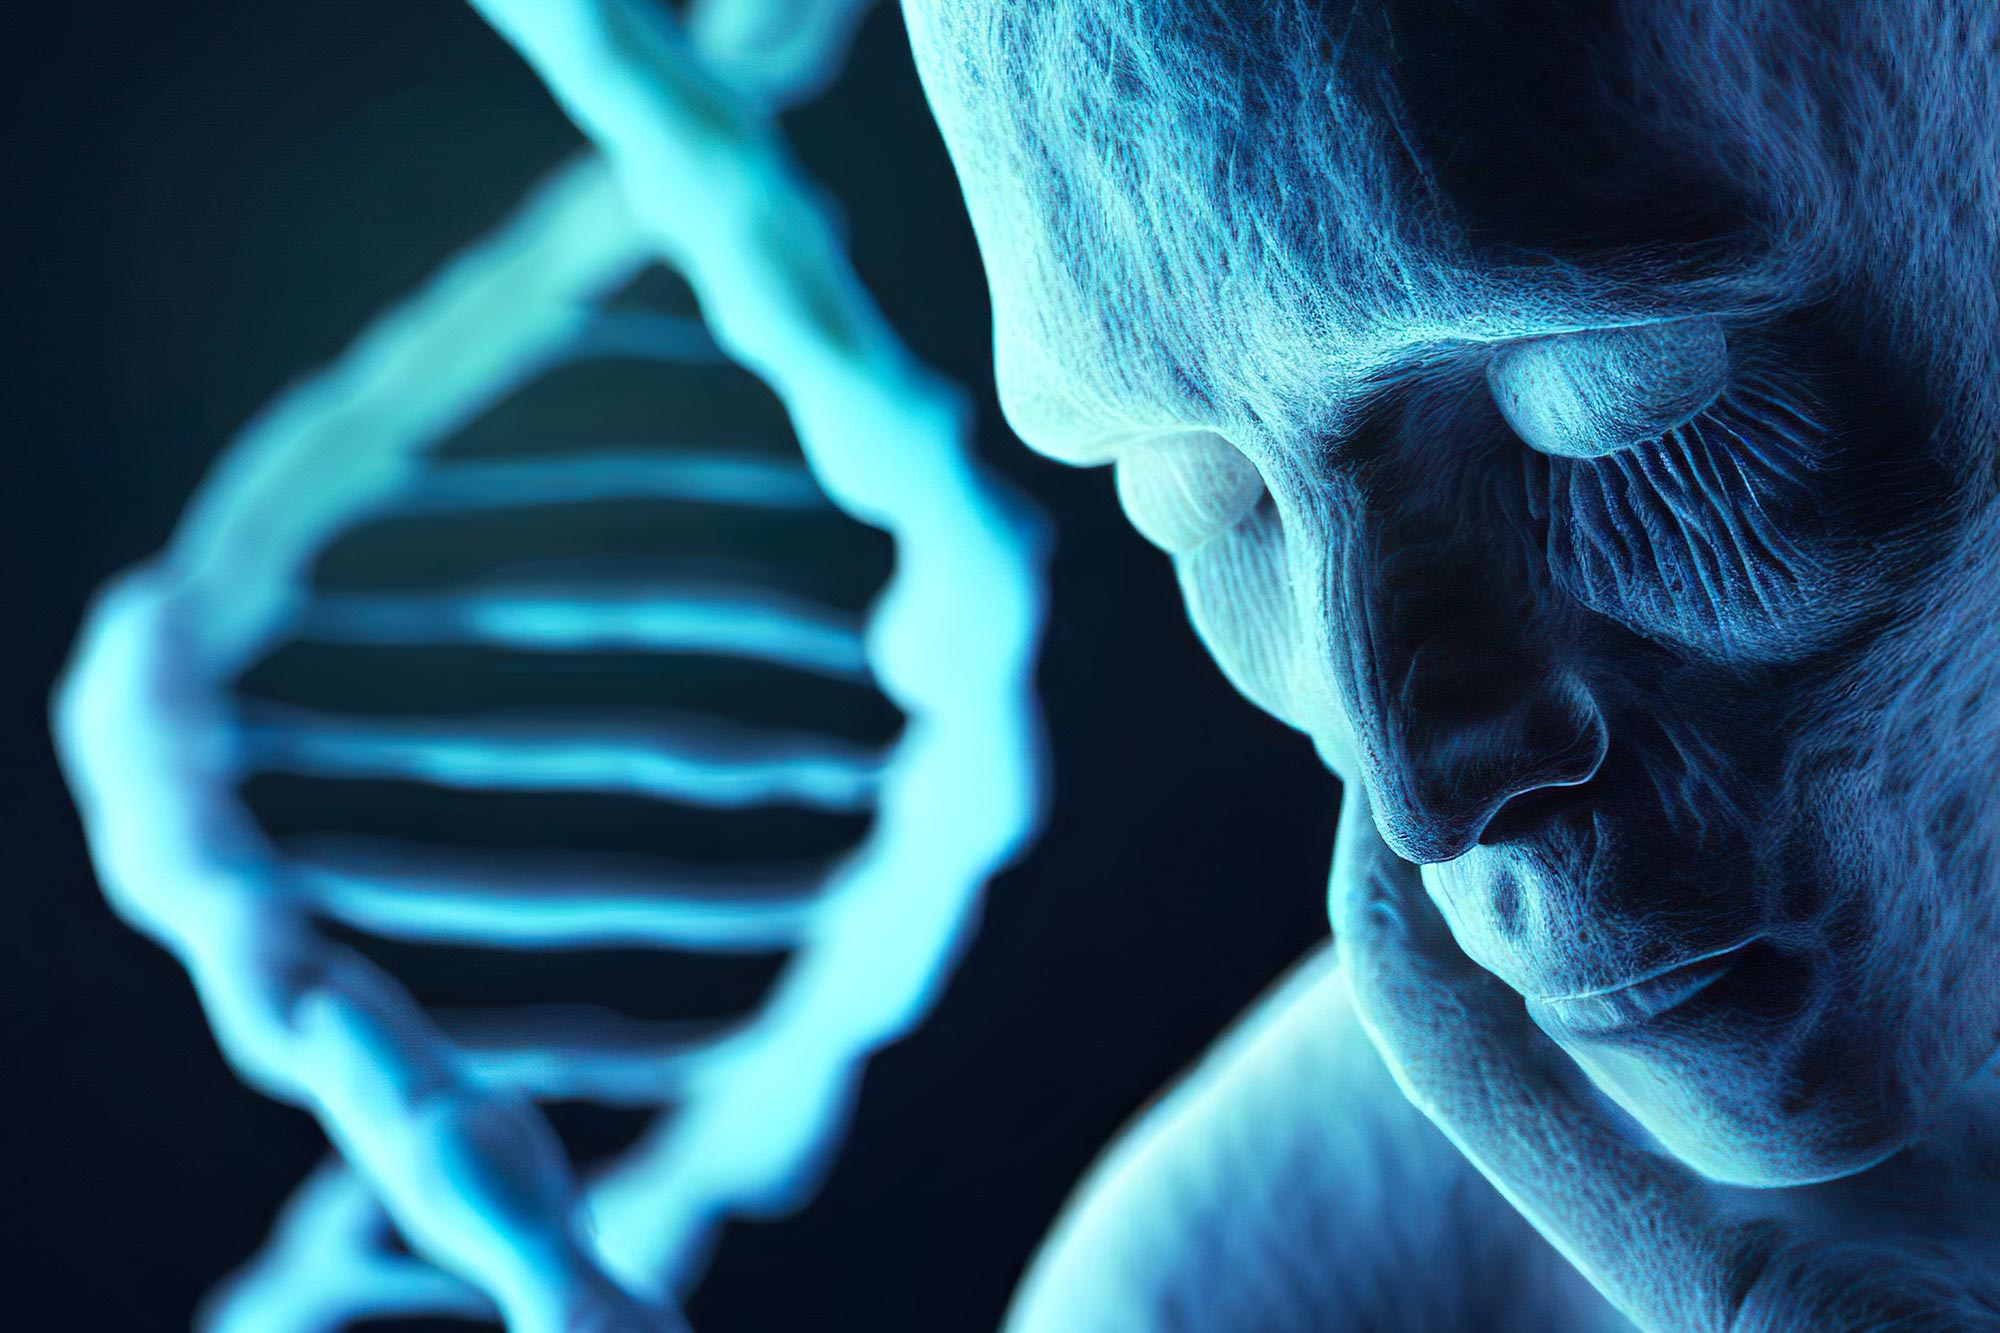 DNA reveals a new twist in the human origin story